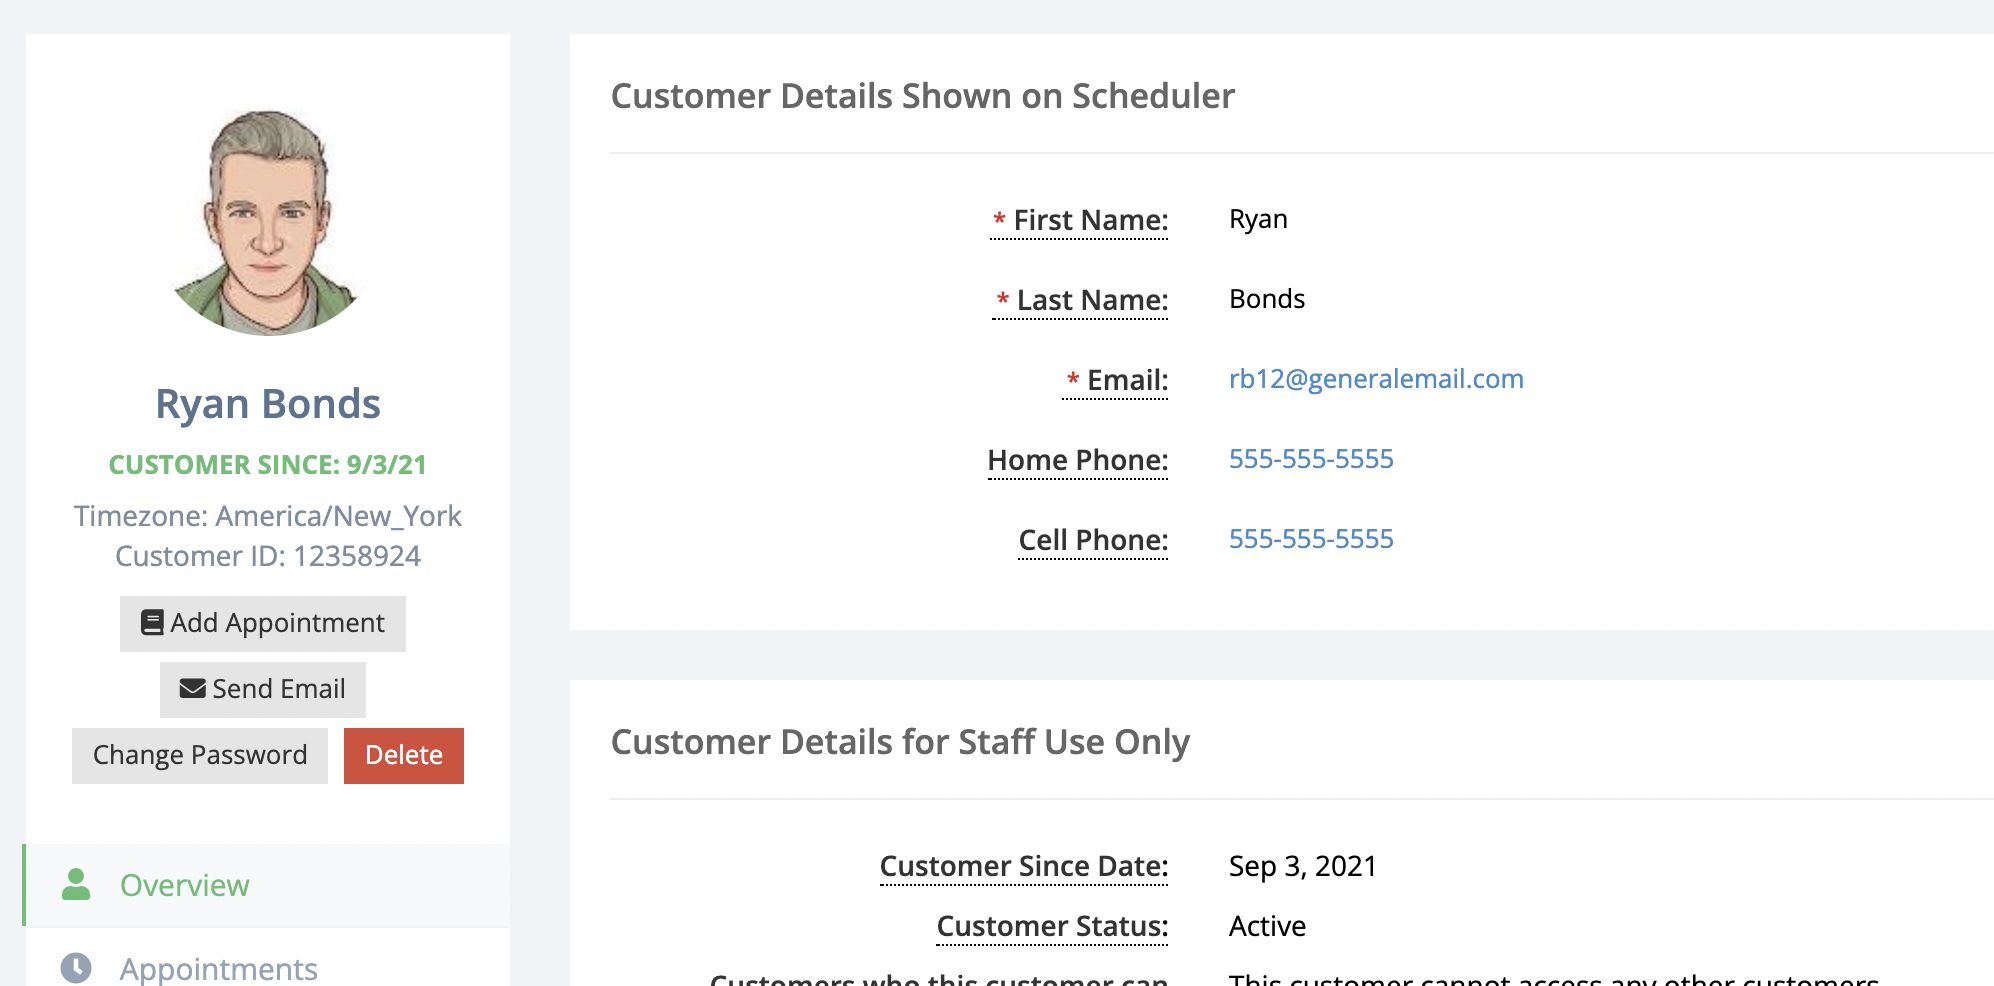 Manage customer profiles. Customer data is automatically loaded when booking appointments. This profile information can be categorized along with notes or other information to help better manage leads and existing clients.